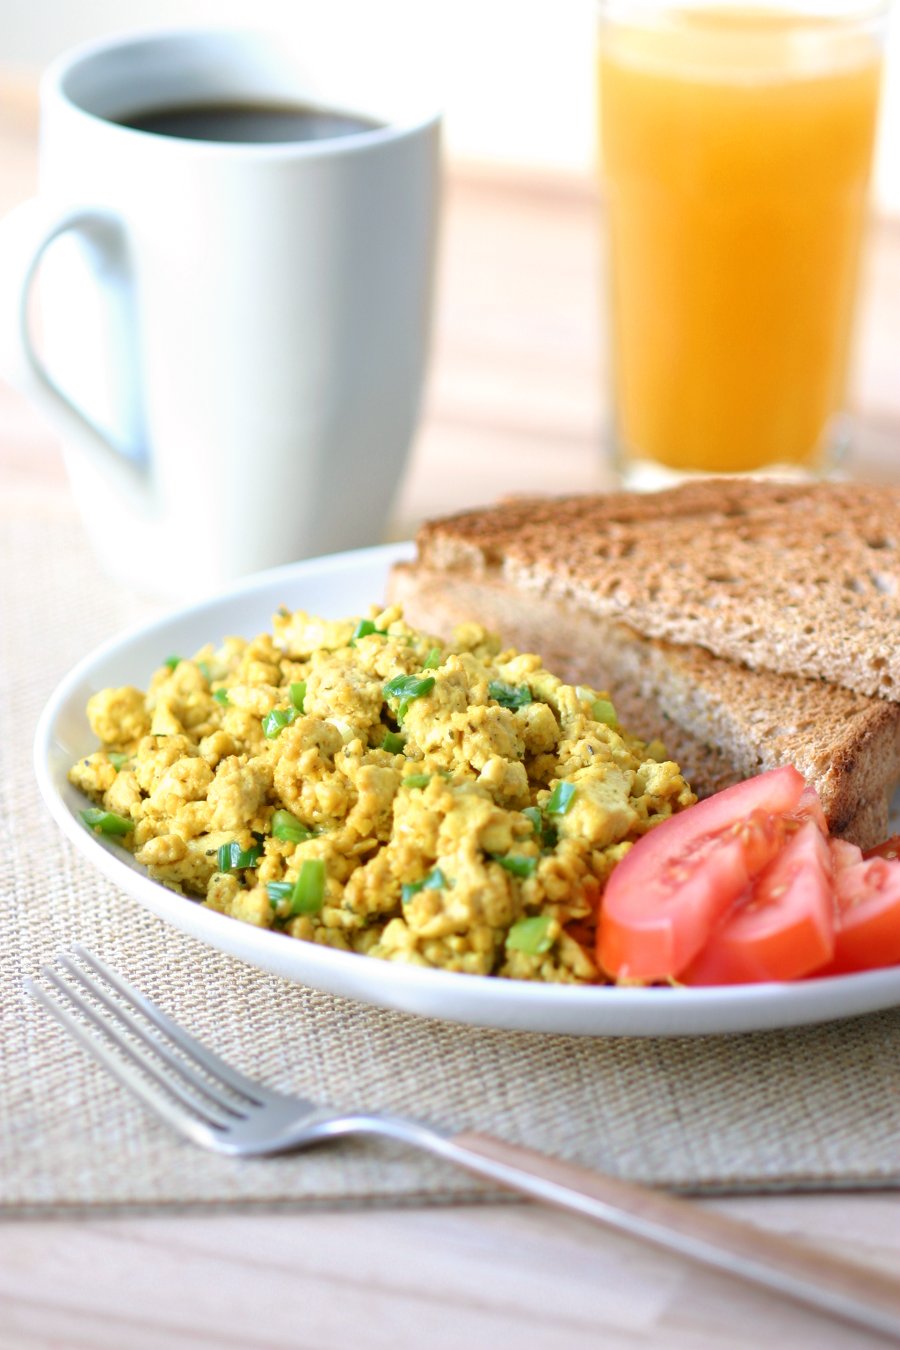 This flavorful Basic Tofu Scramble is simply delicious and can be endlessly adapted to your liking with different veggies, herbs, and spices.